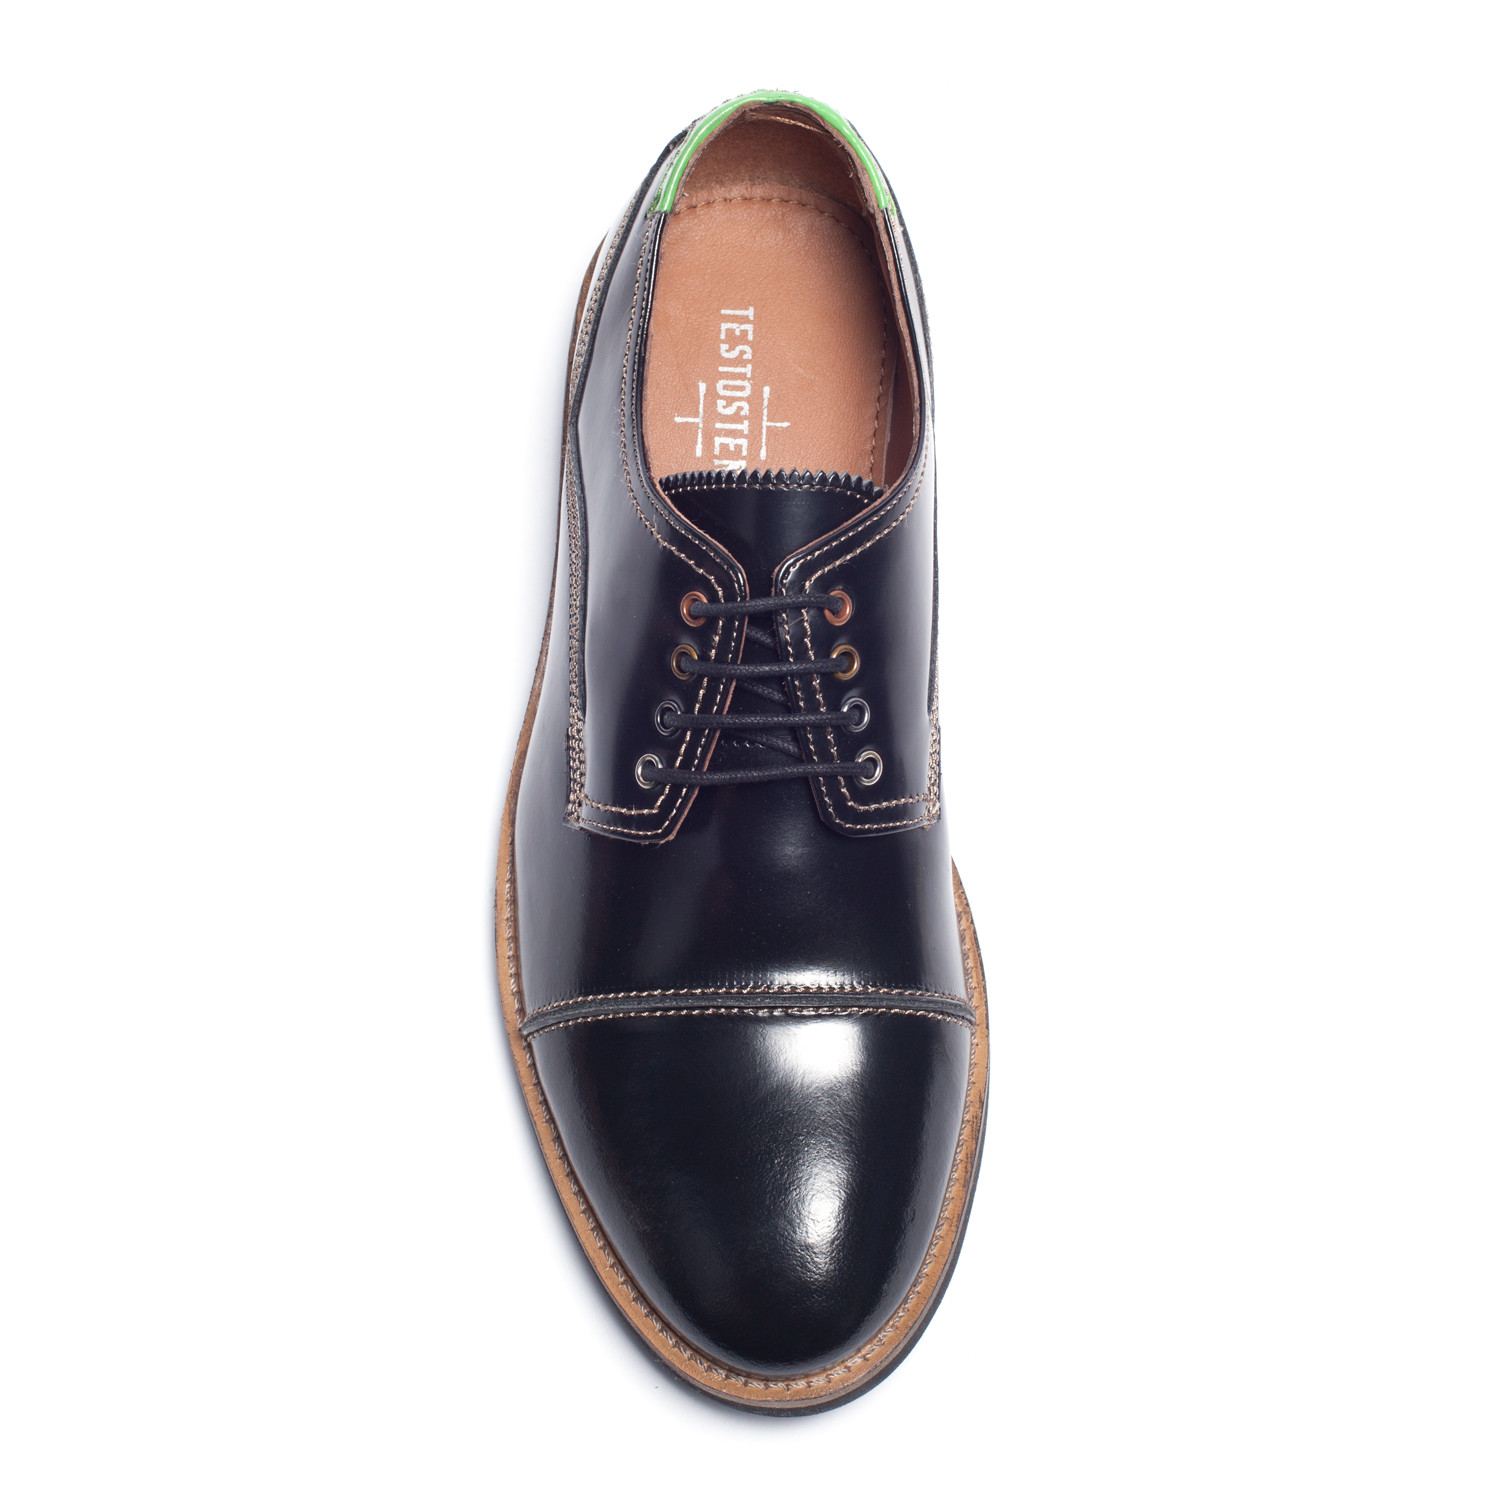 Parlor Game Derby // Black (US: 8) - Testosterone Shoes ...